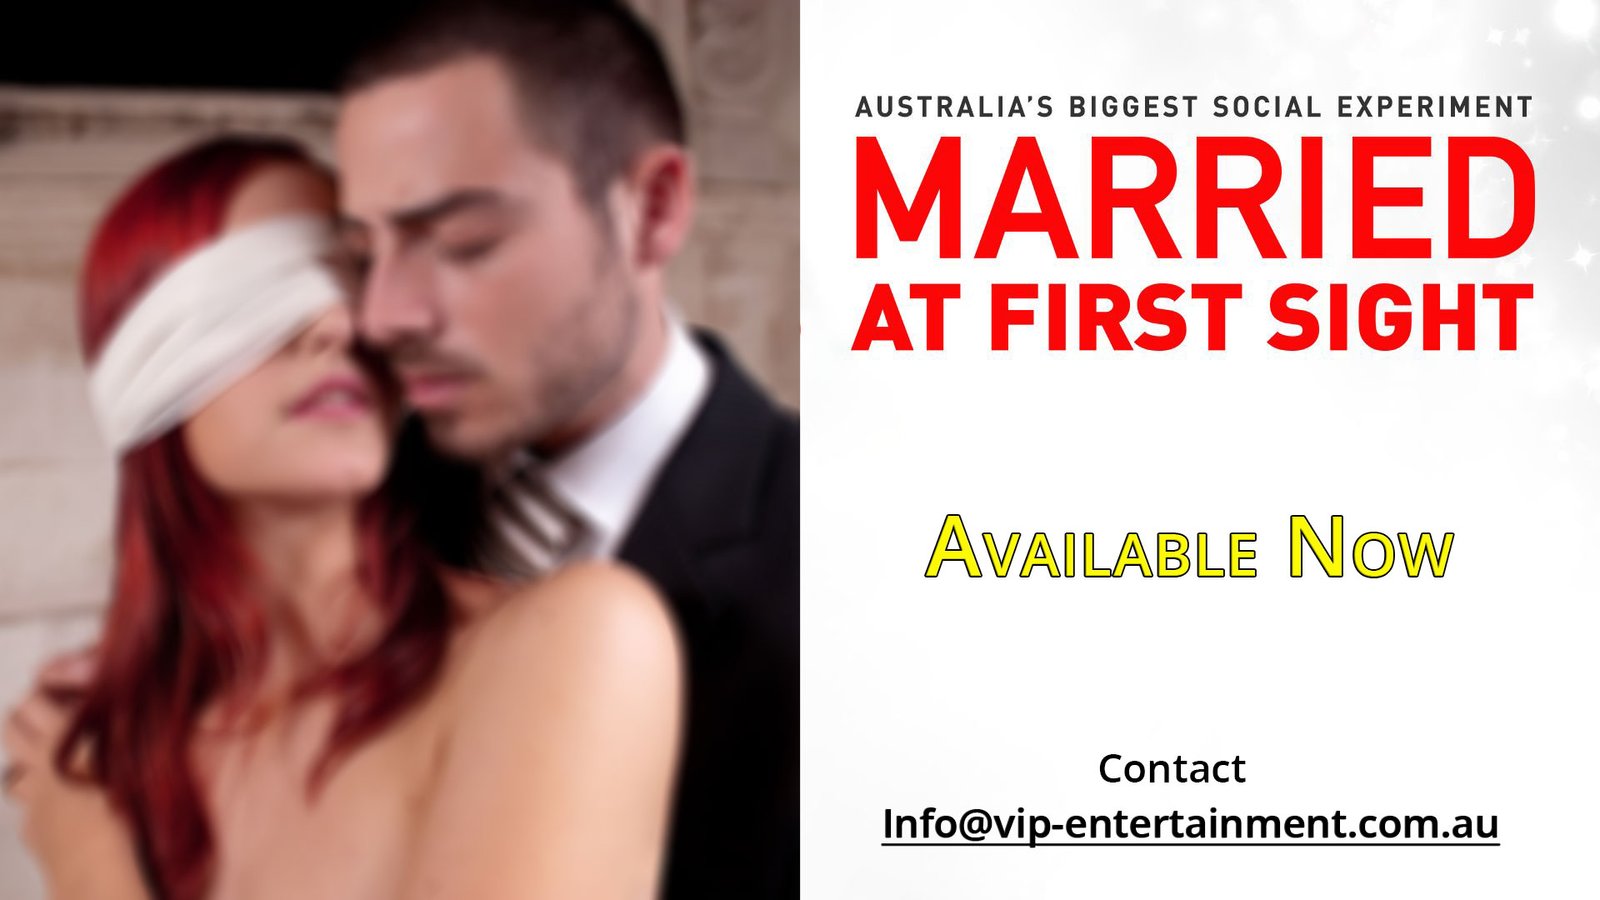 Married At First Sight cast available now